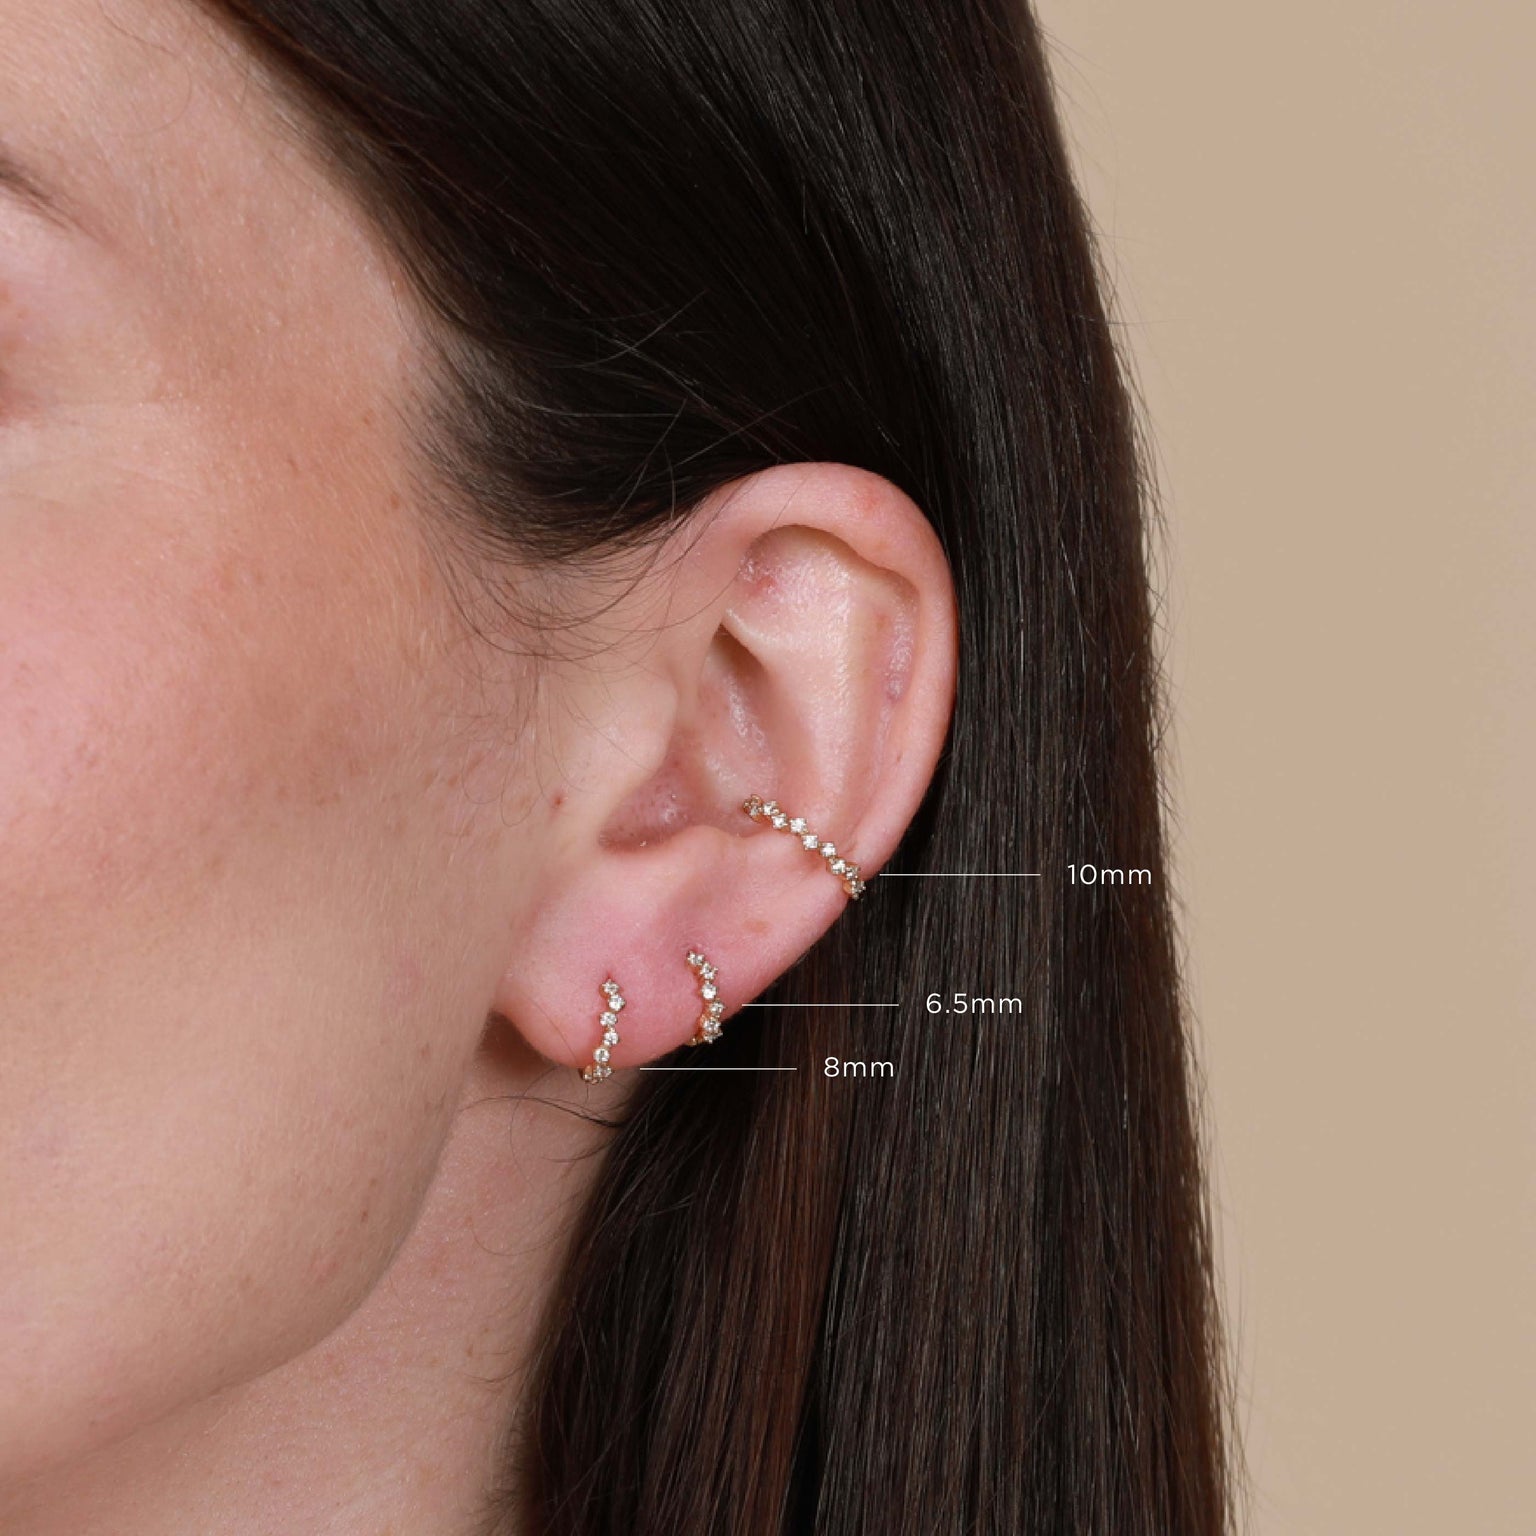 Worn shot of Cluster Hoop 6.5mm in Gold in the upper lobe piercing labelled with other sizes